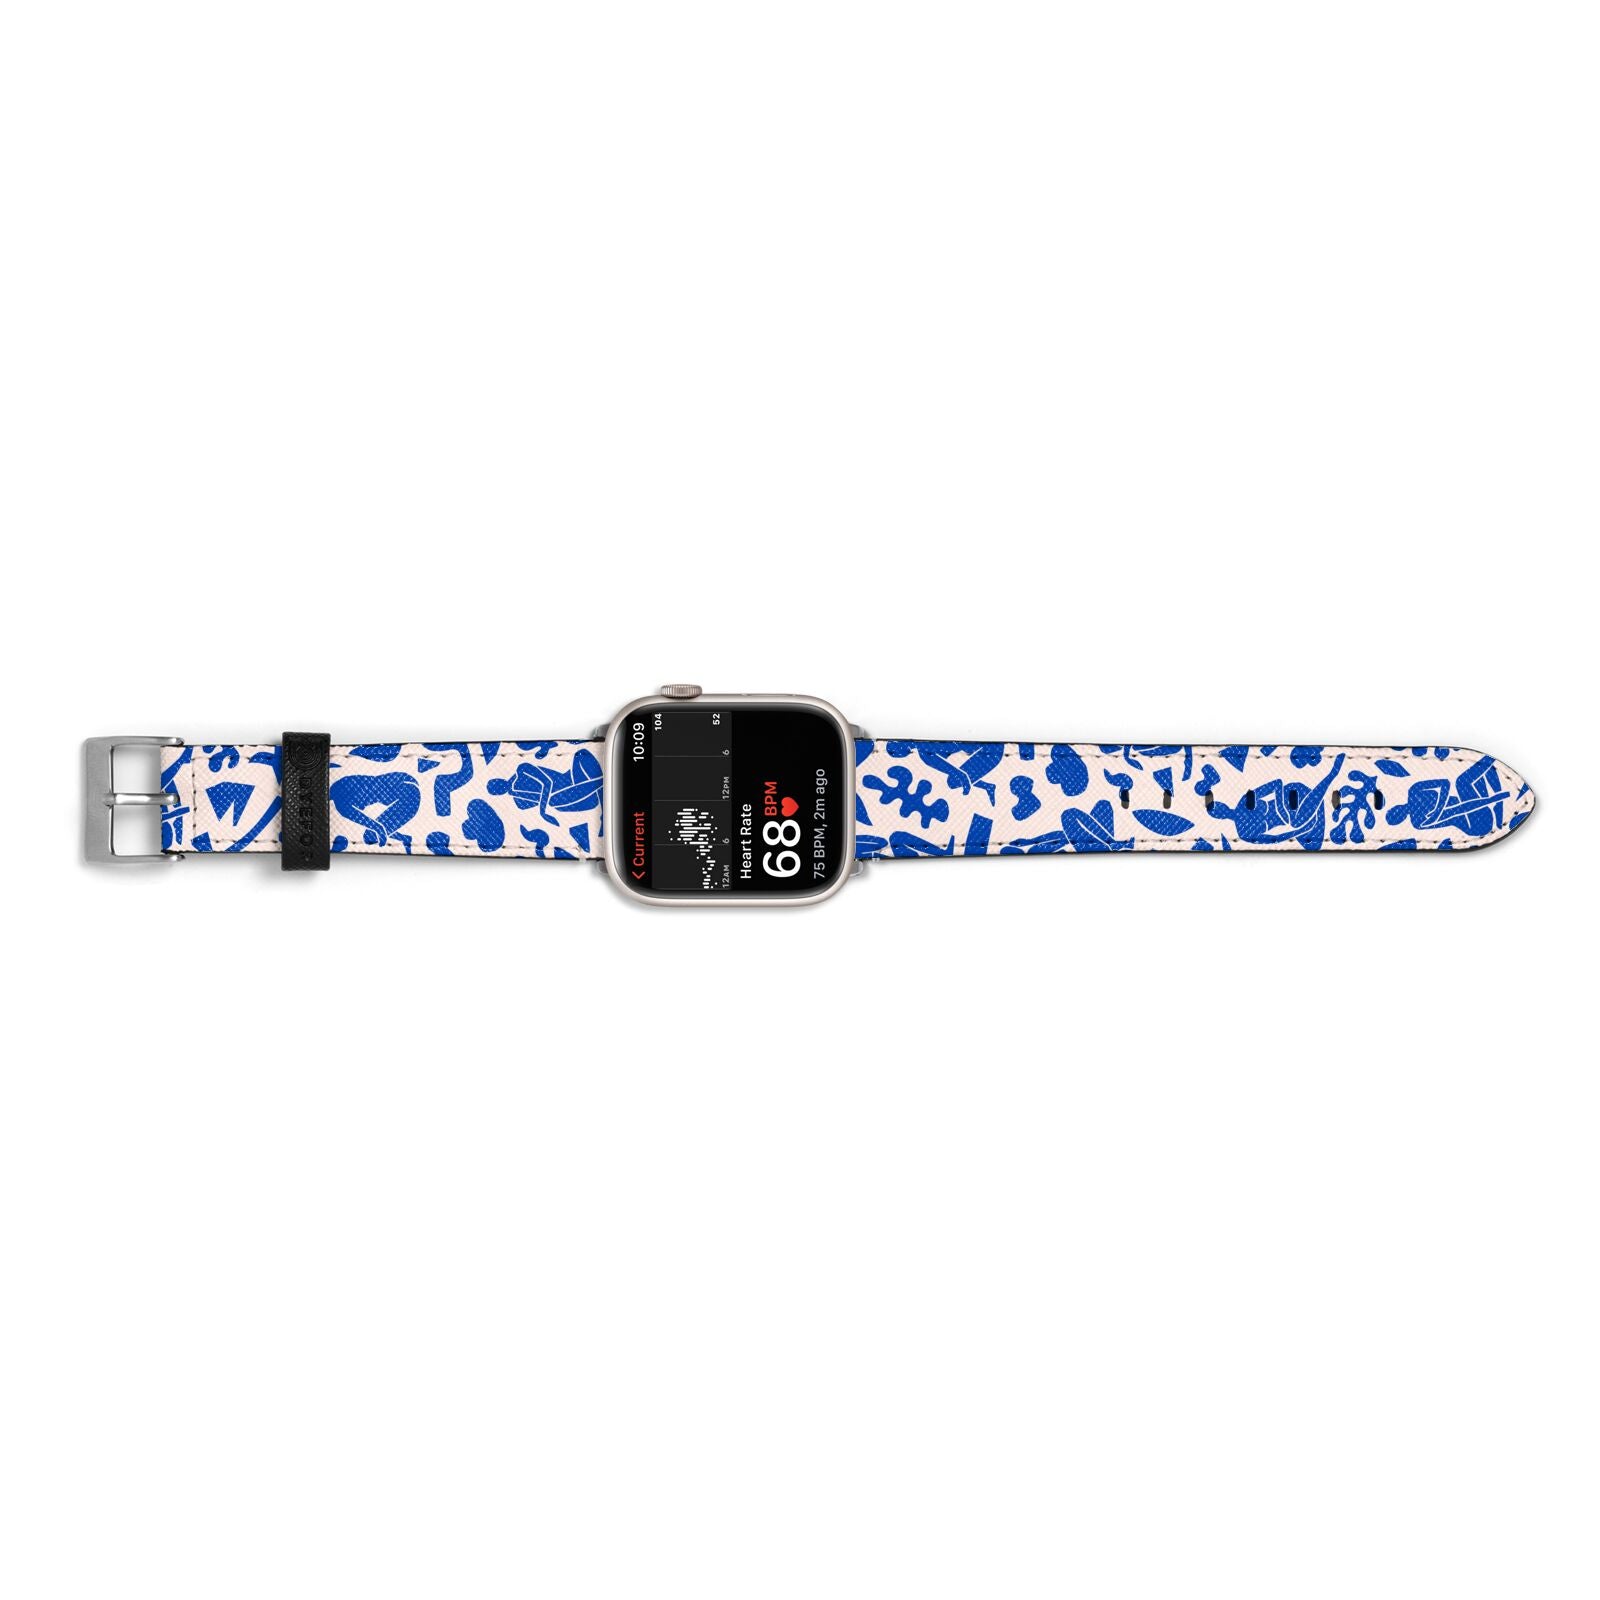 Abstract Art Apple Watch Strap Size 38mm Landscape Image Silver Hardware